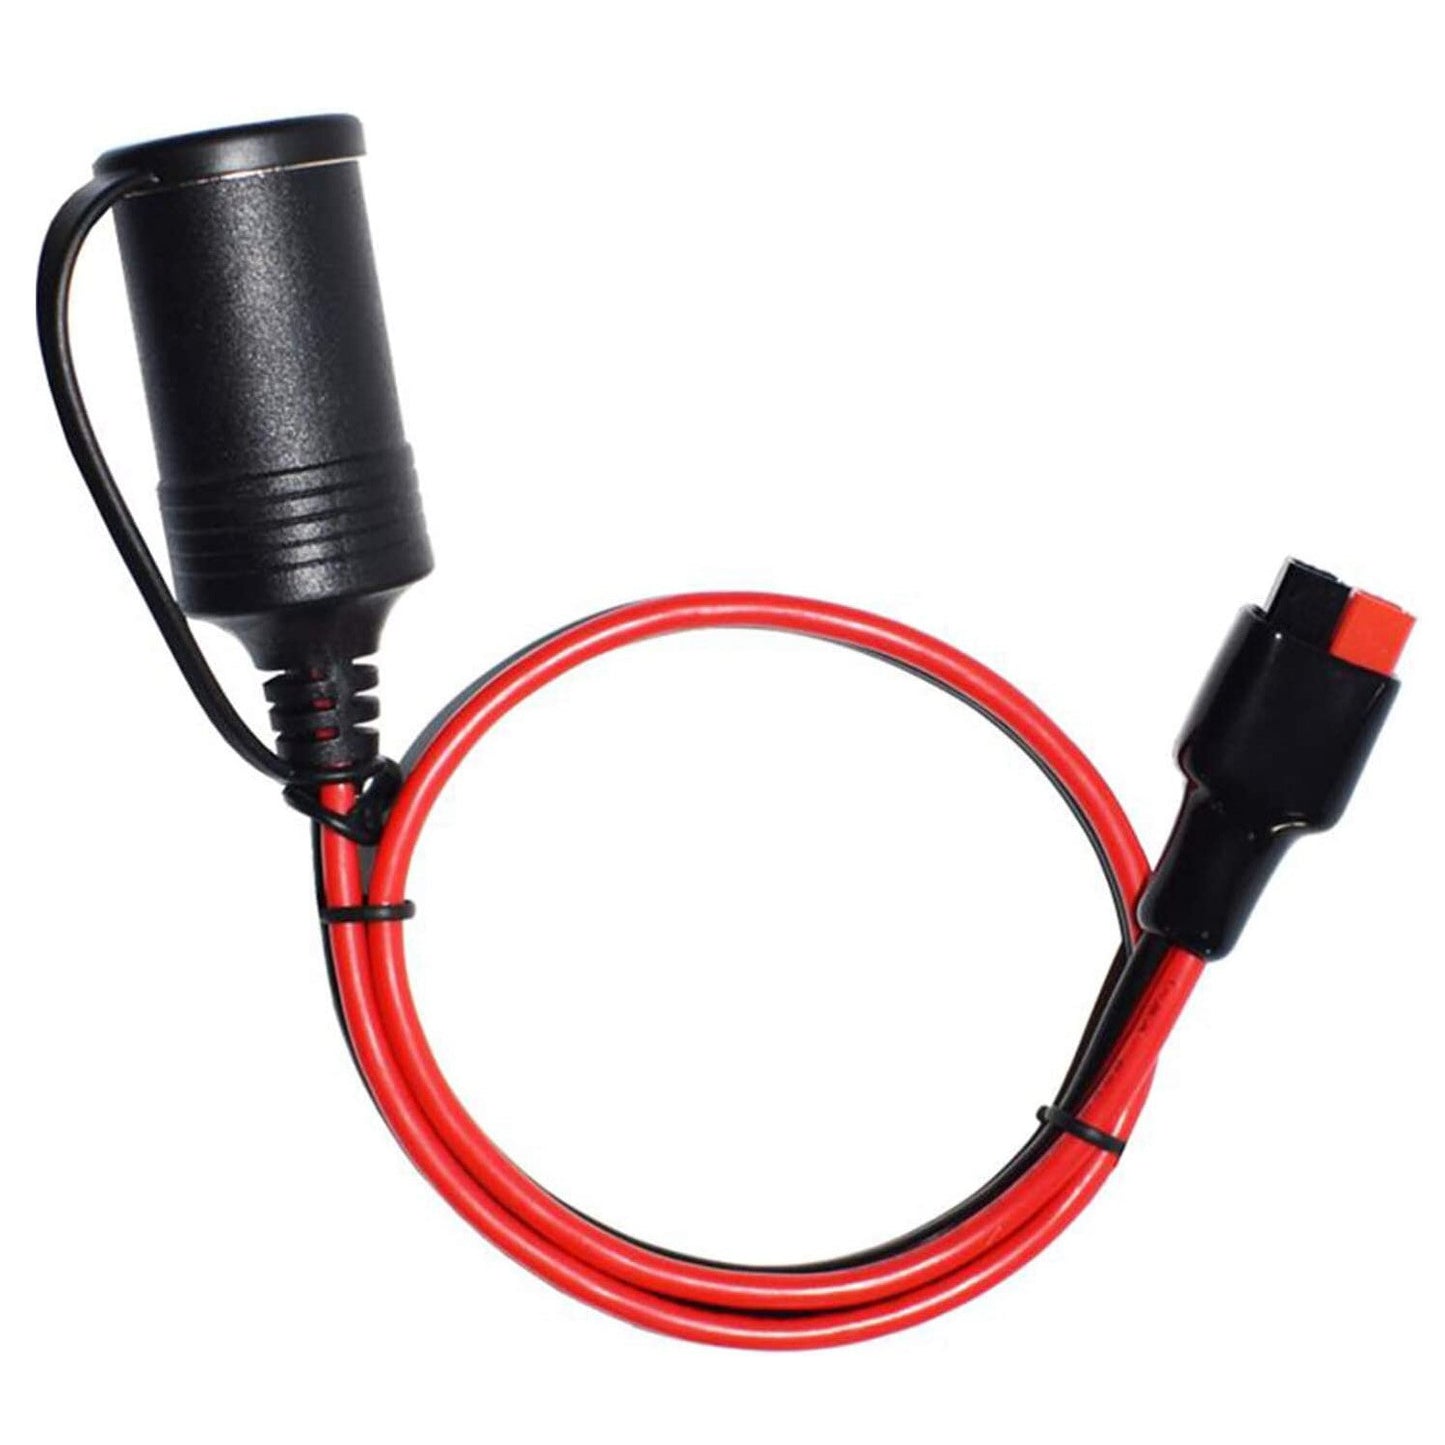 Car Cigarette Lighter Female 14AWG Heavy Duty Extension Cable Adapter with Anderson Power Pole Connector 3.3ft/1m